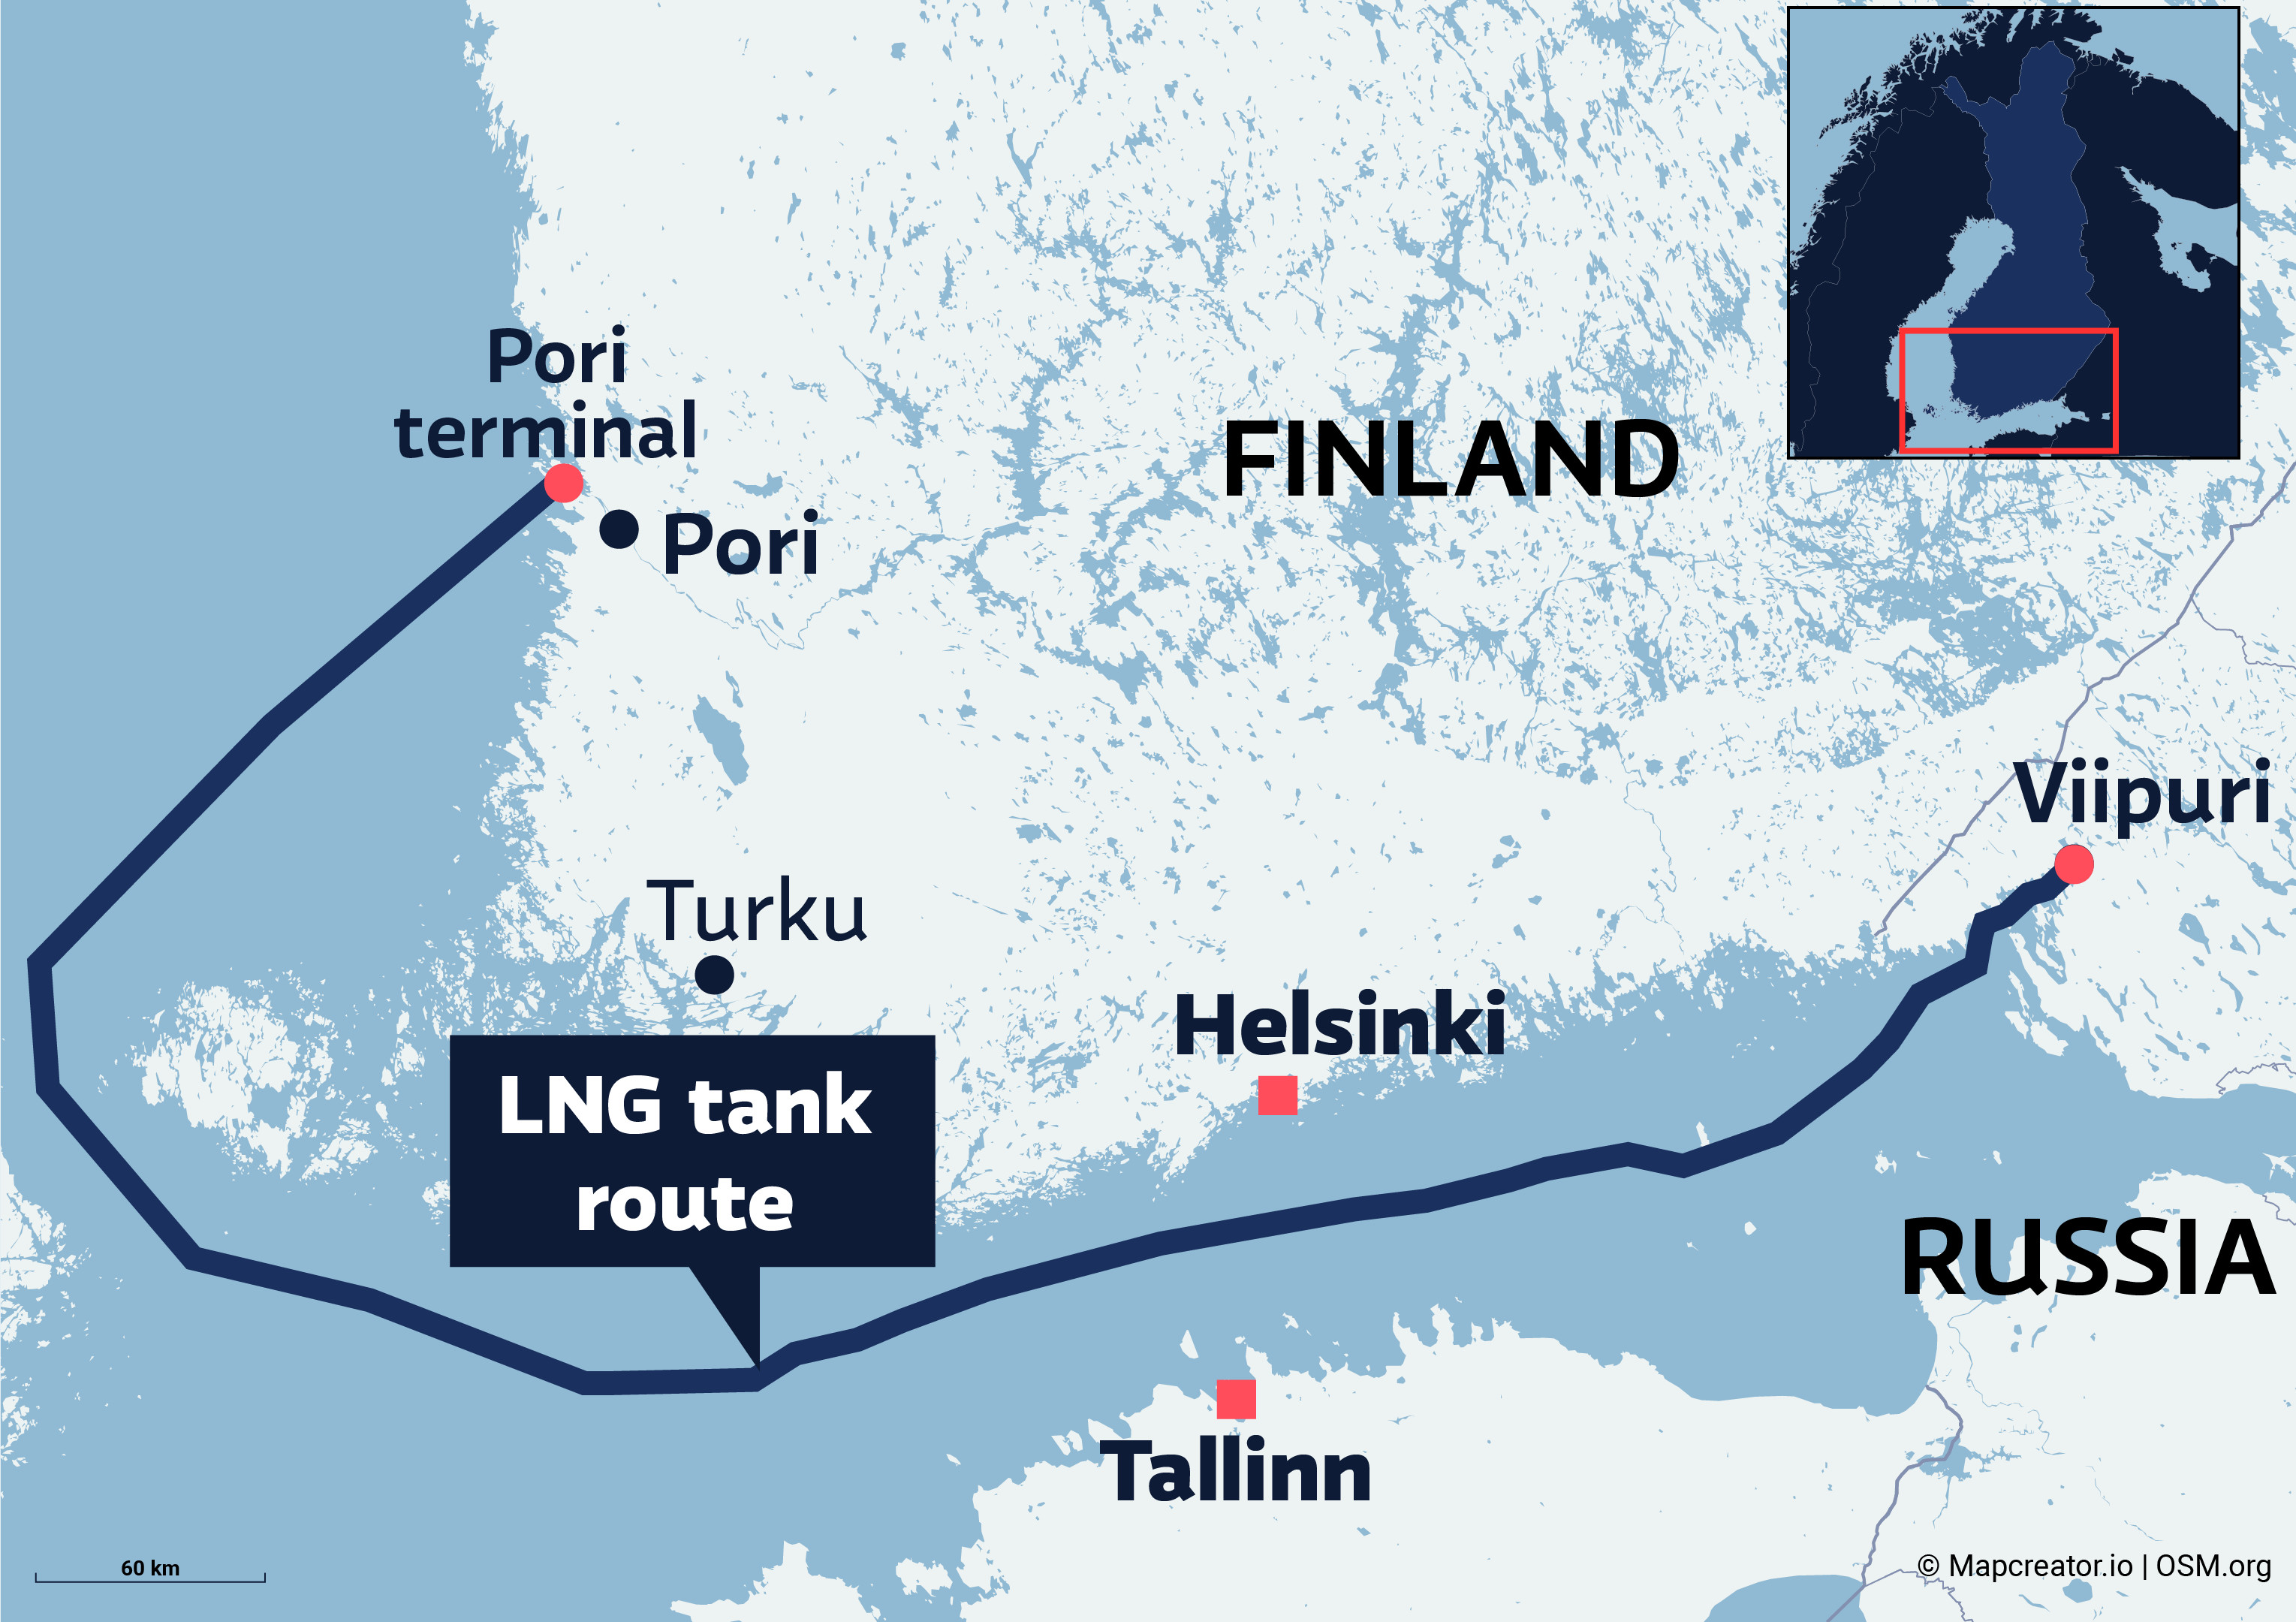 Gasum, which still imports Russian LNG via Pori, is looking for alternative deliveries